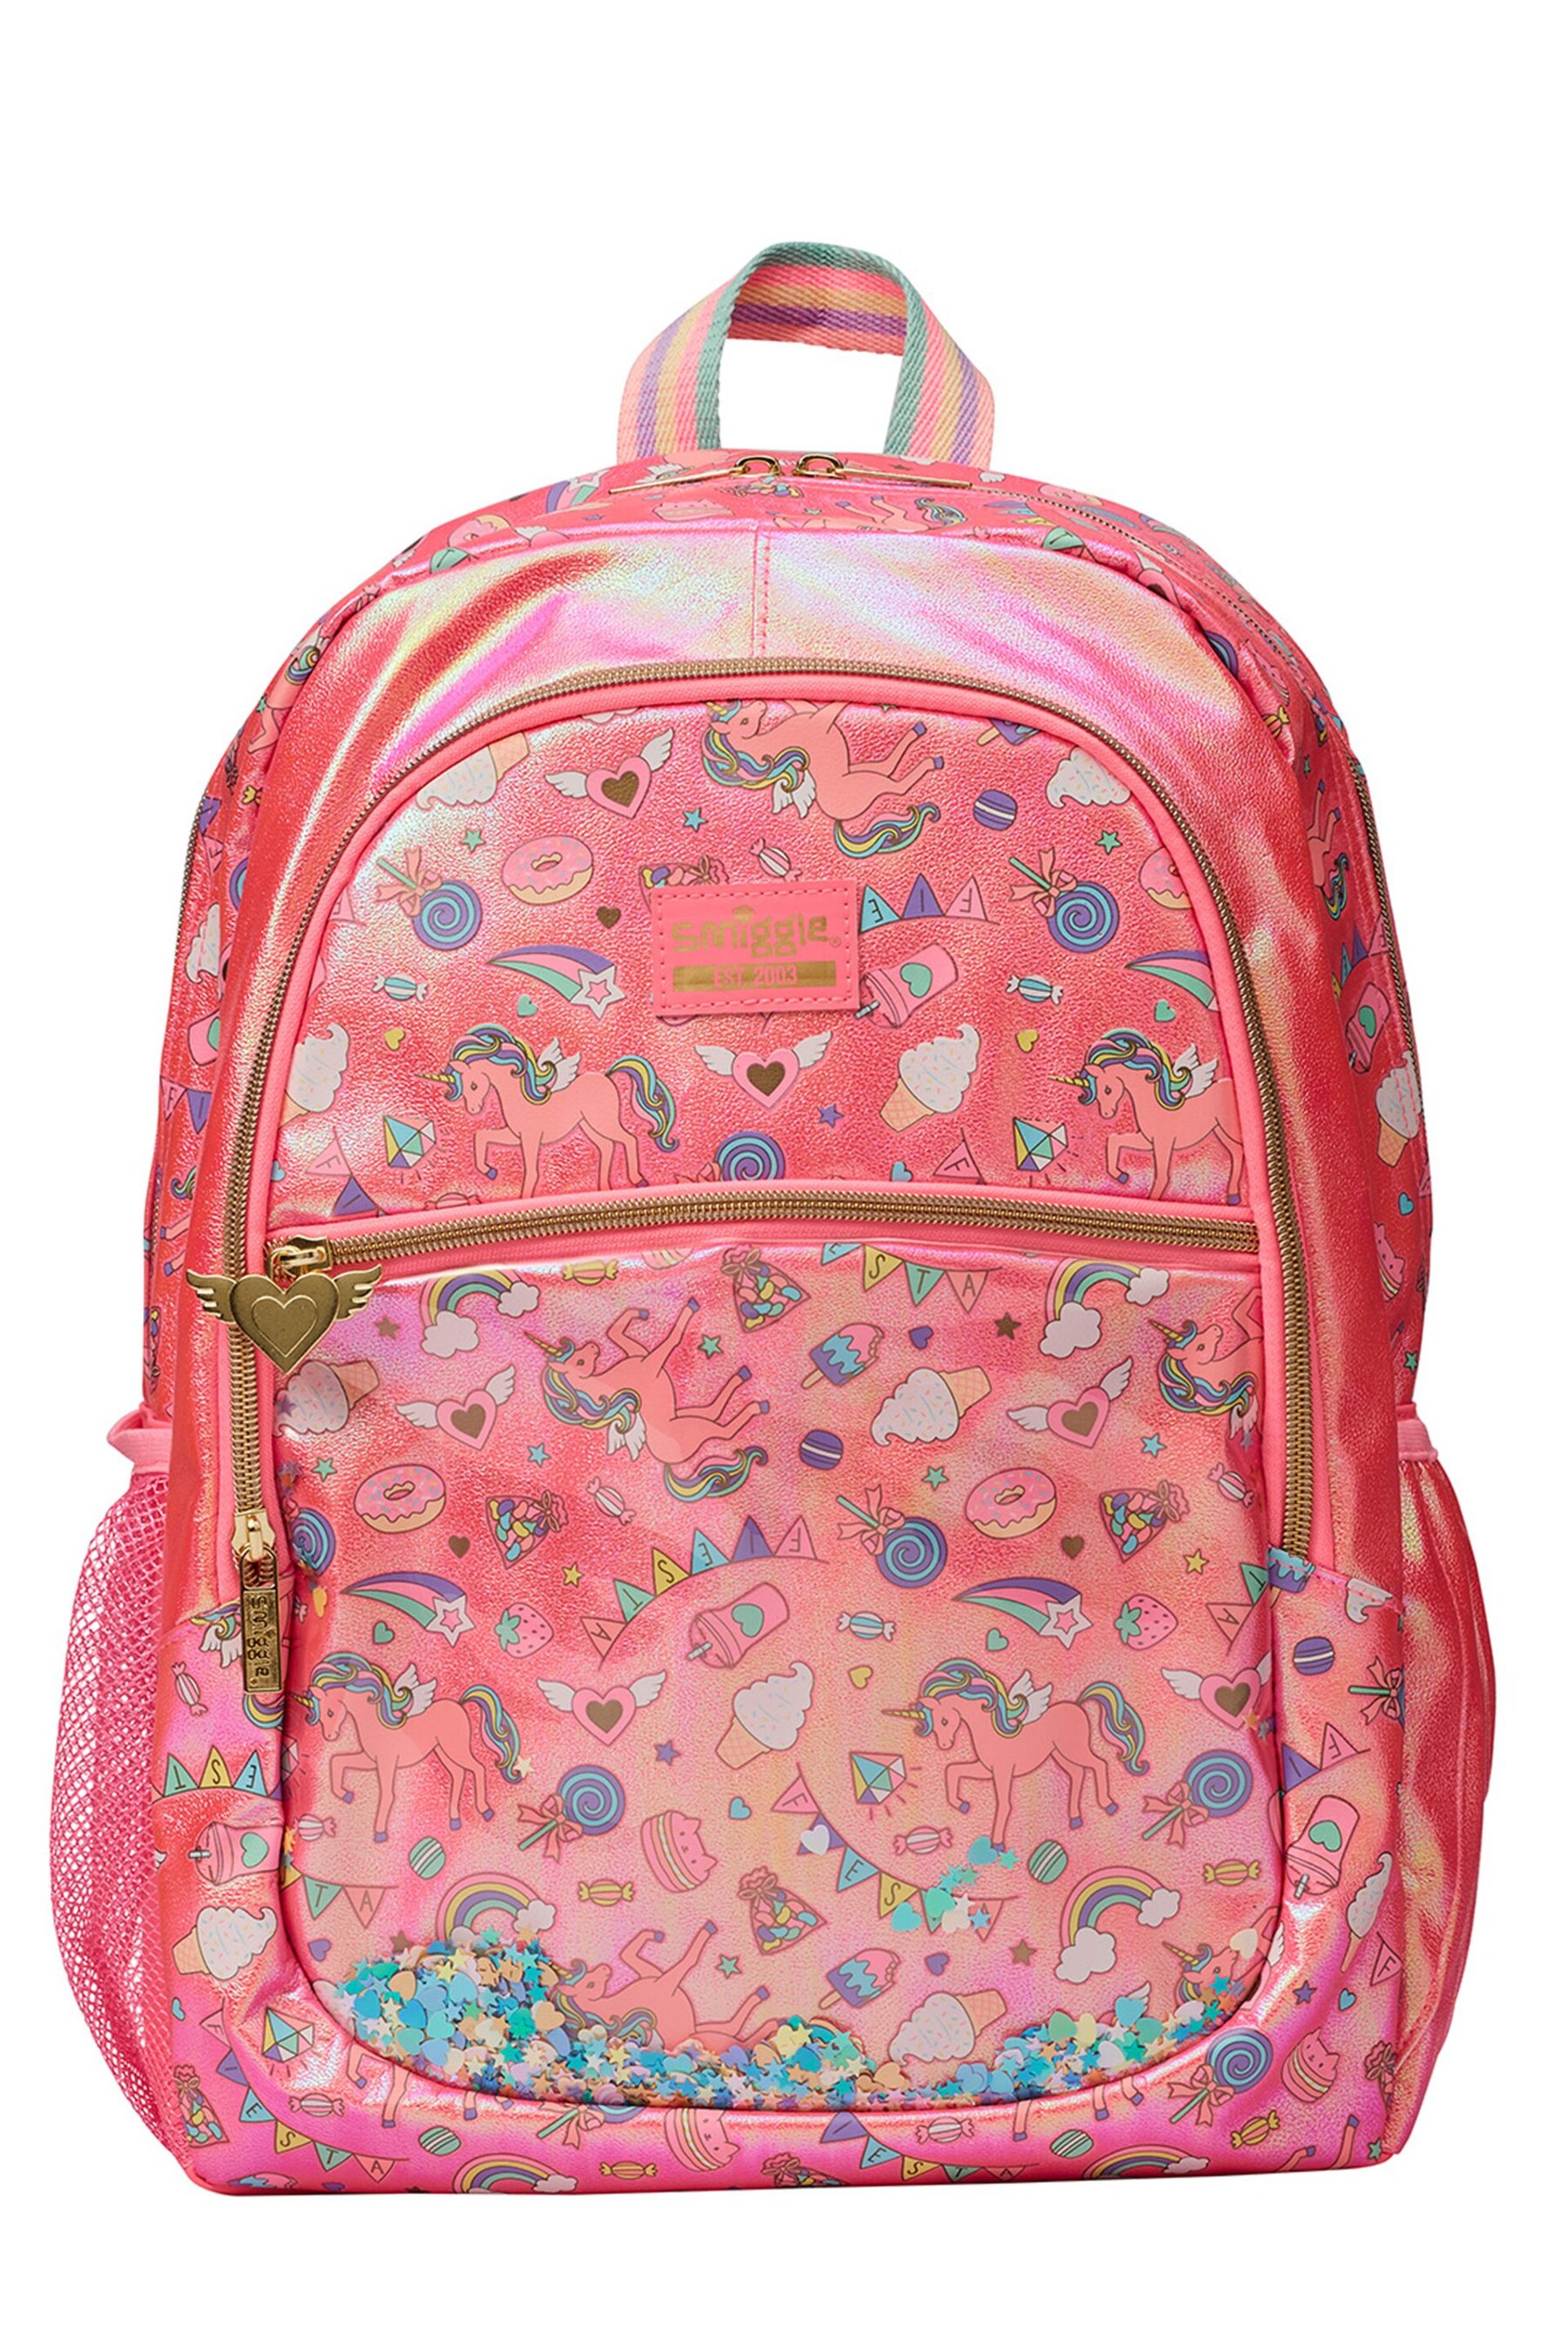 Smiggle Pink Fiesta Classic Backpack - Image 1 of 3